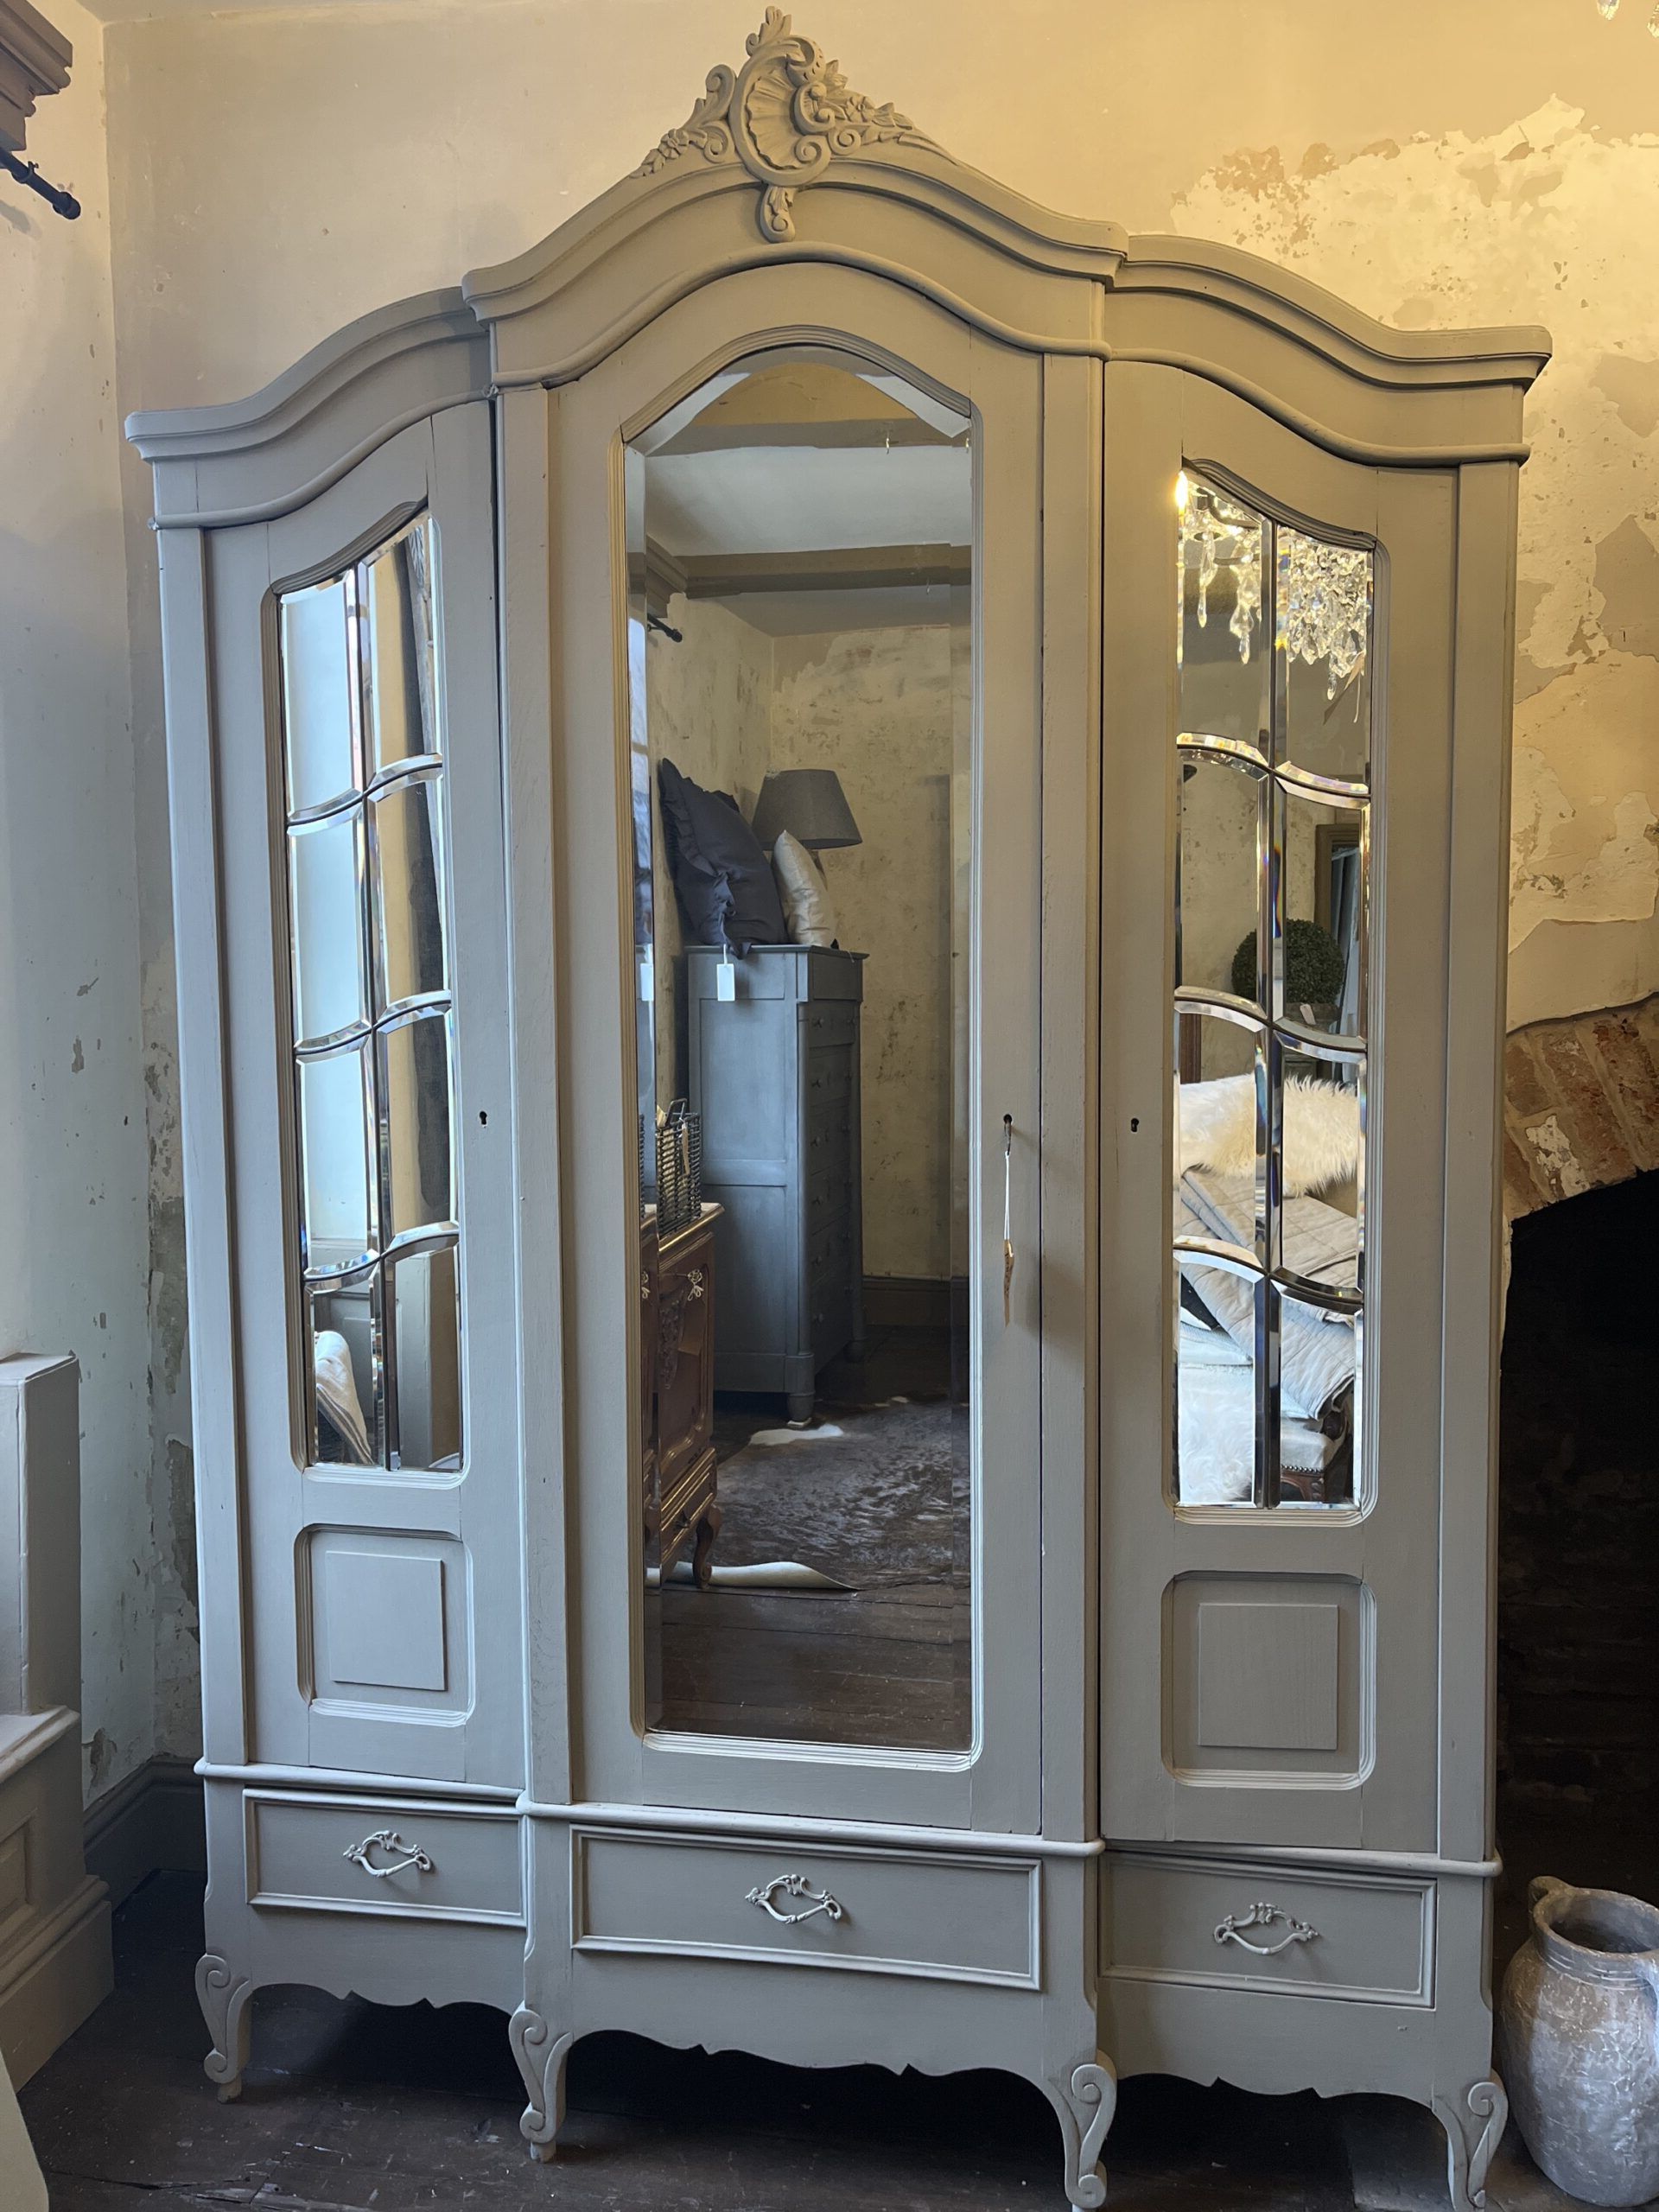 Armoires – Wardrobes – Vitrines | Village Chic Intended For French Wardrobes For Sale (View 8 of 20)